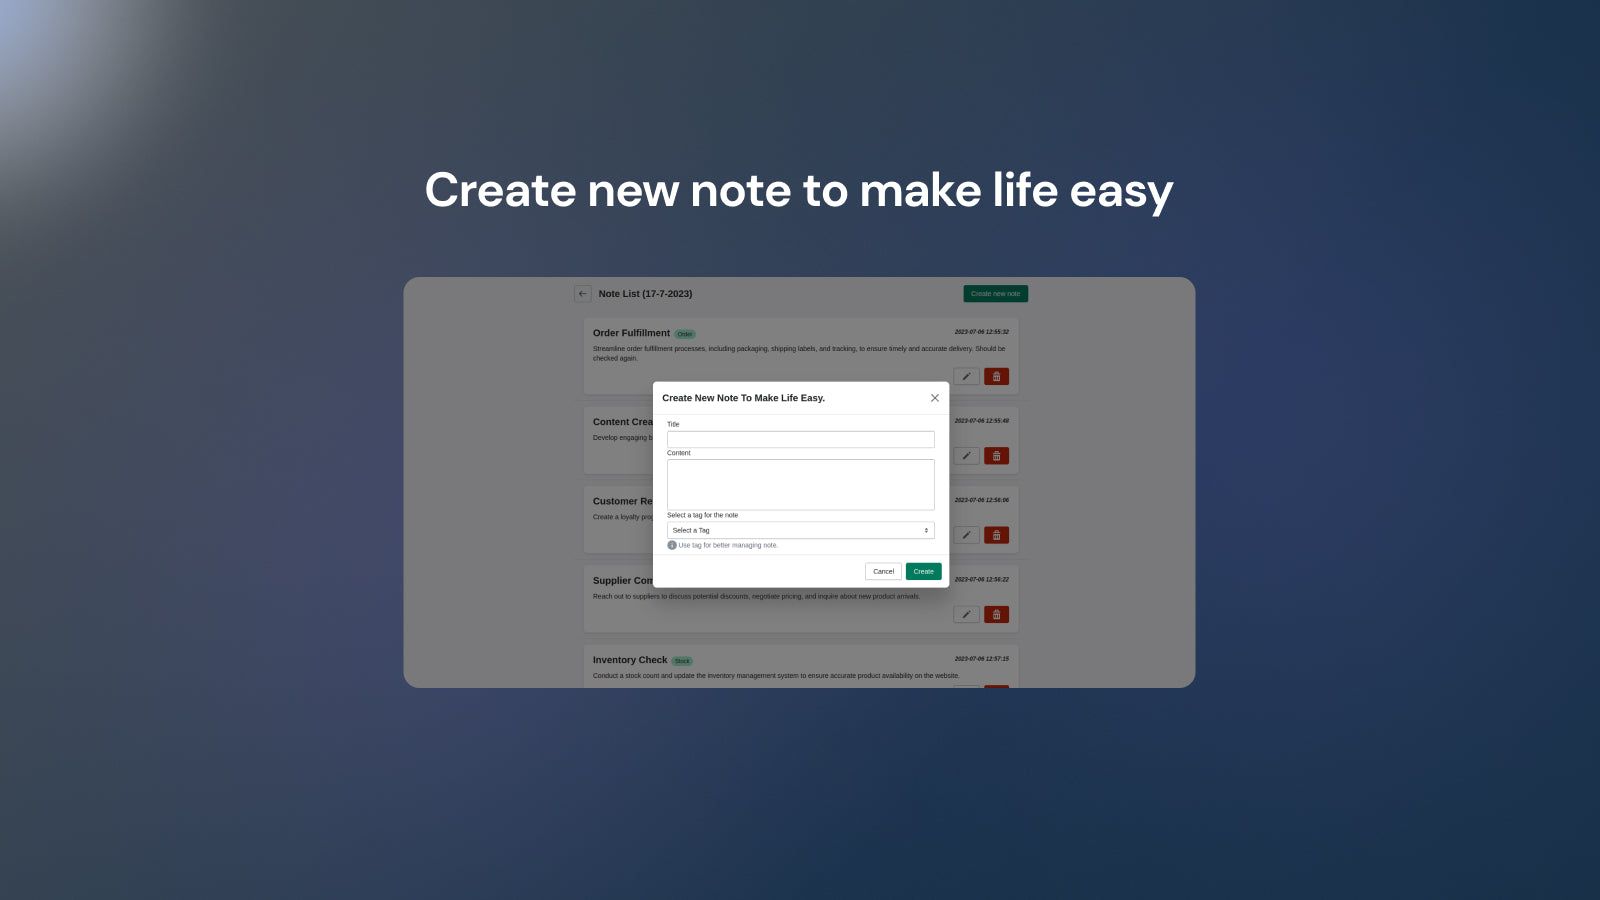 Create new note to make life easy.